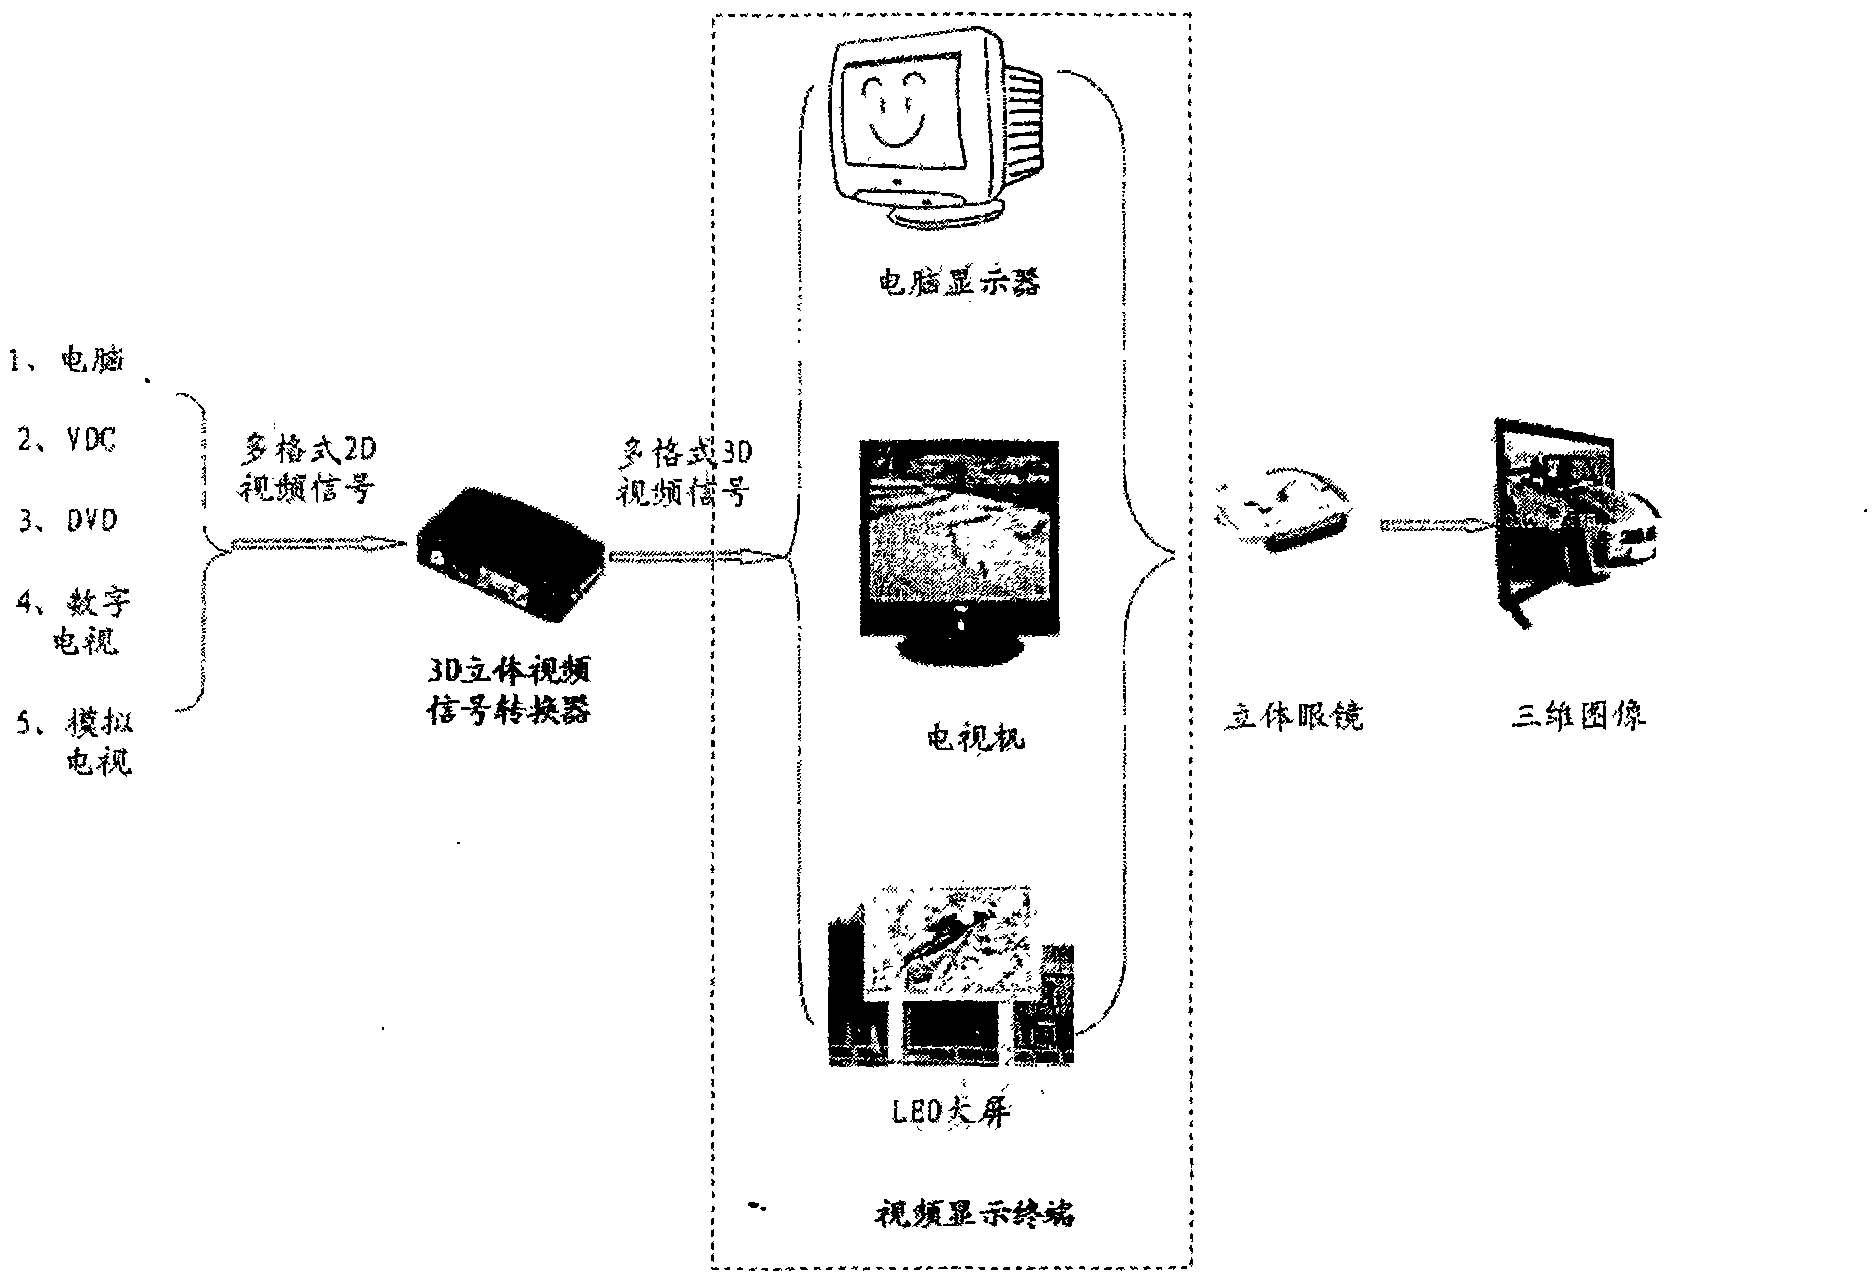 Technical scheme for transforming 2D video image signals to 3D video image signals and application thereof